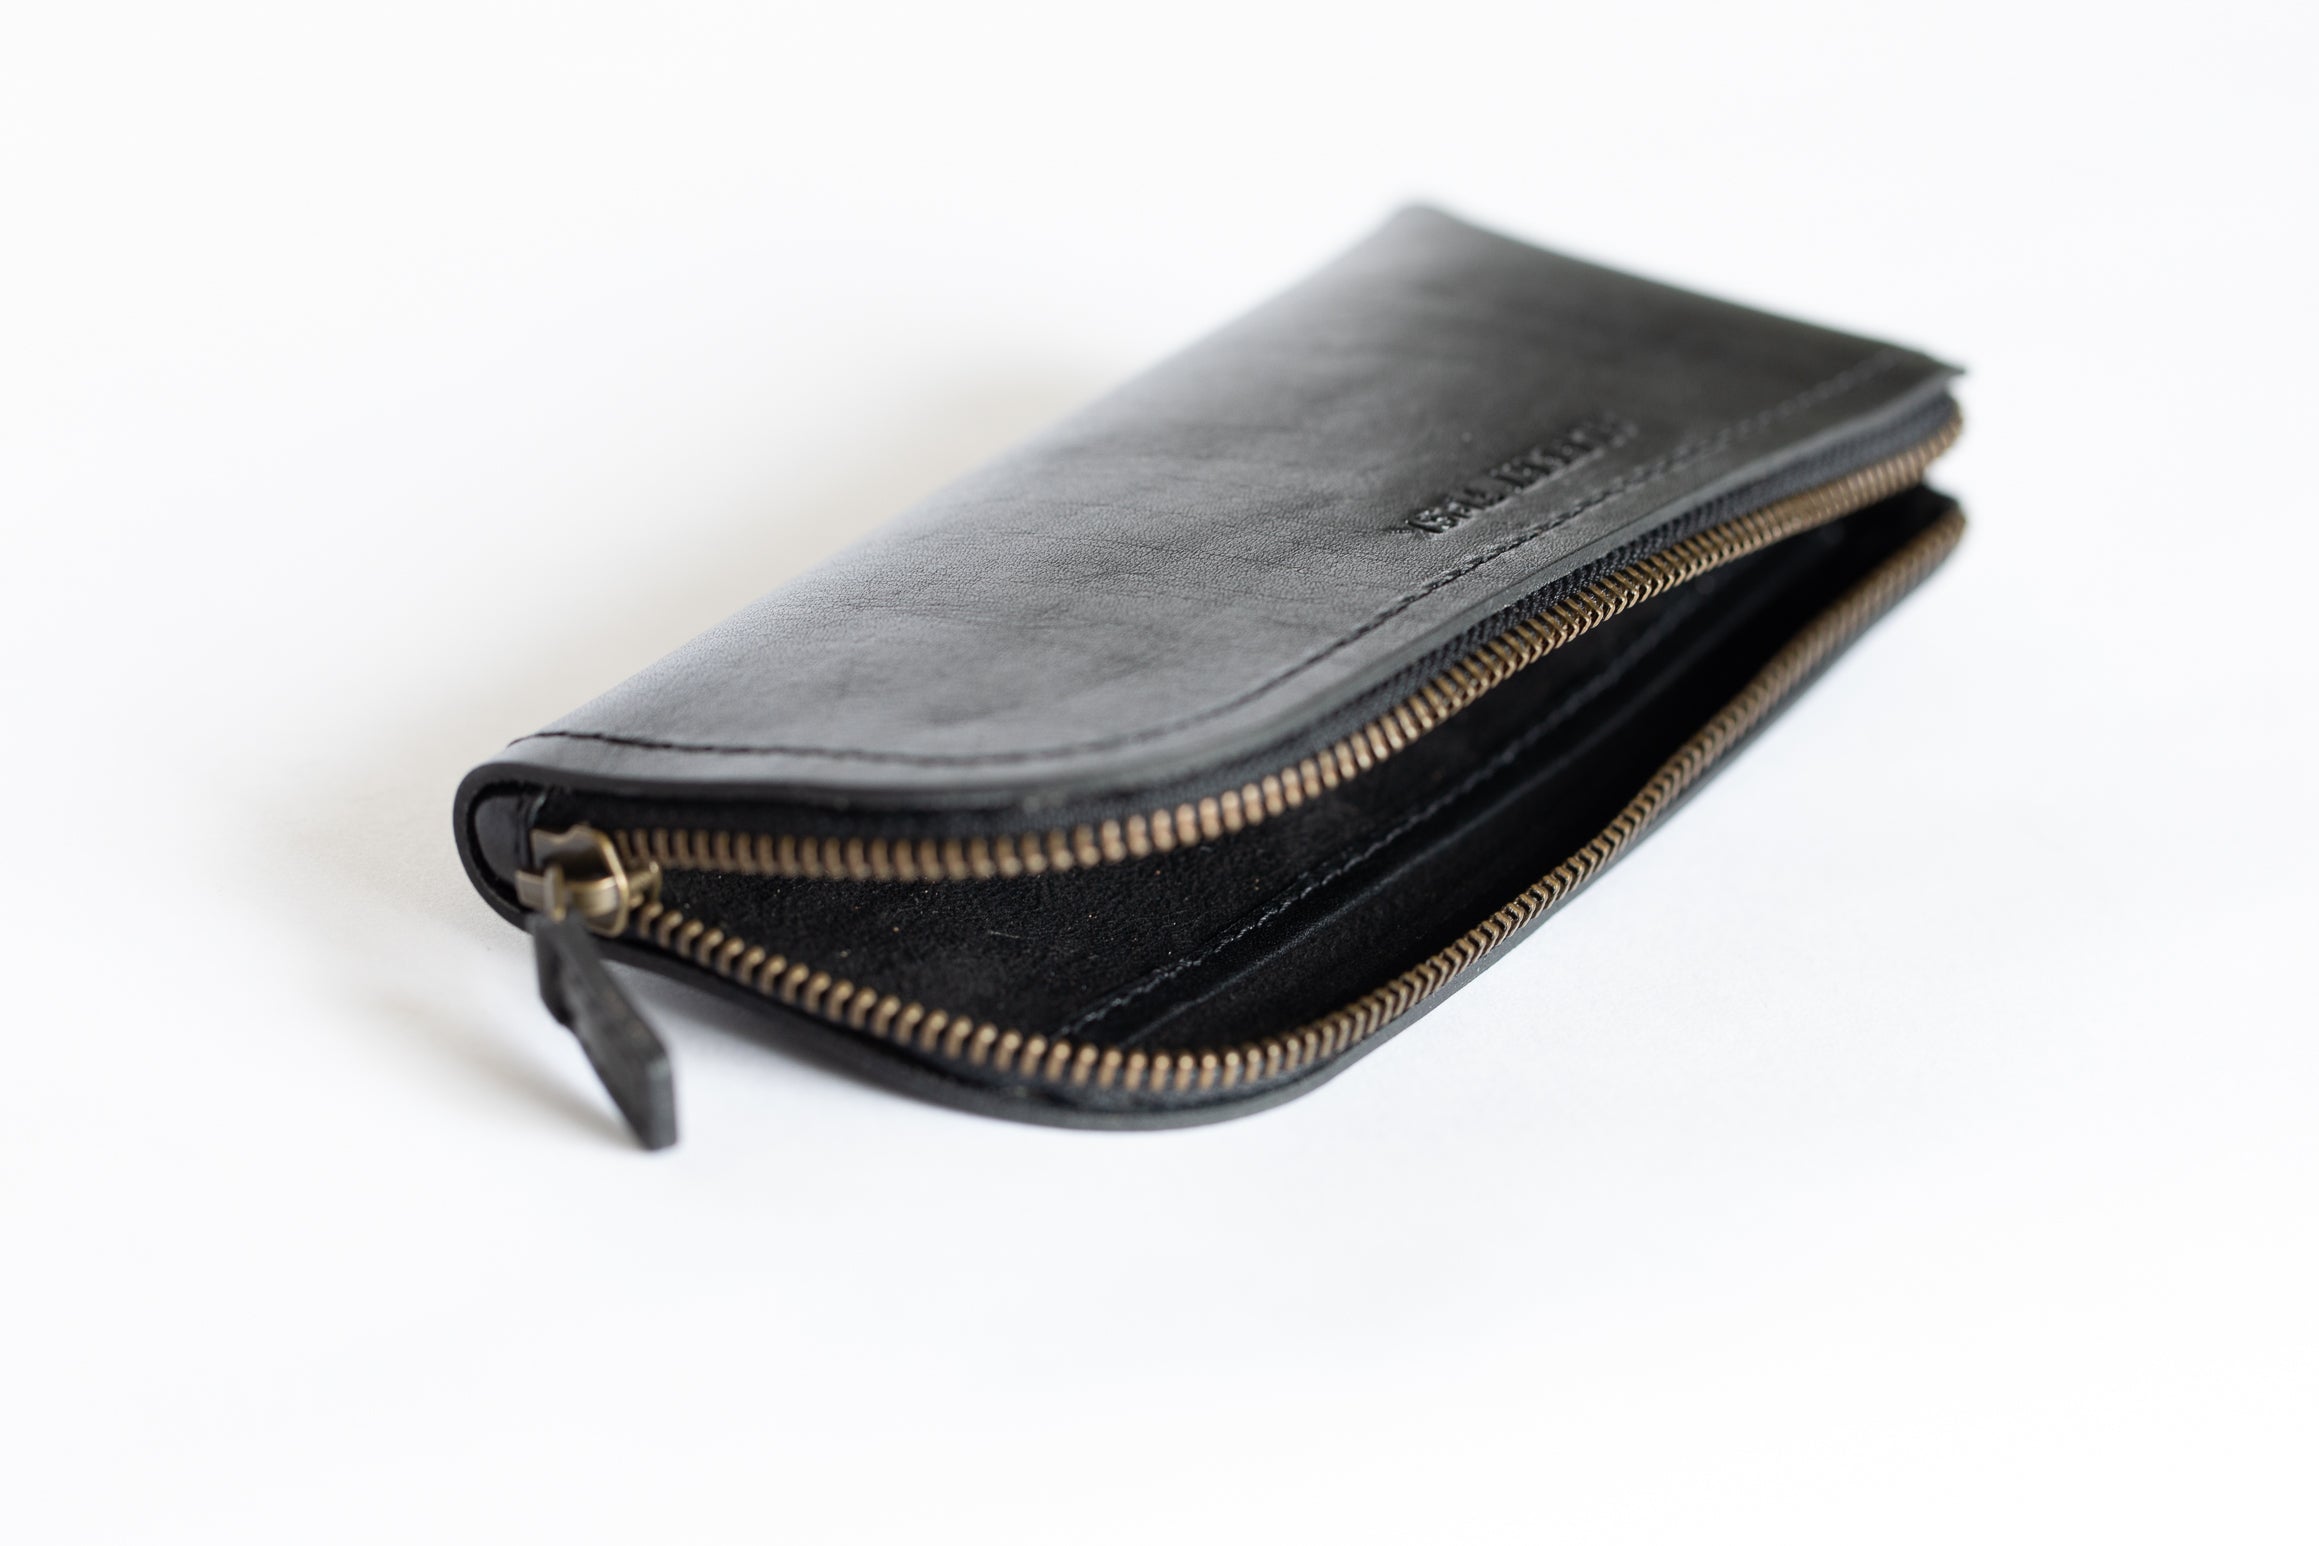 Daily Pouch, Women's Small Leather Goods